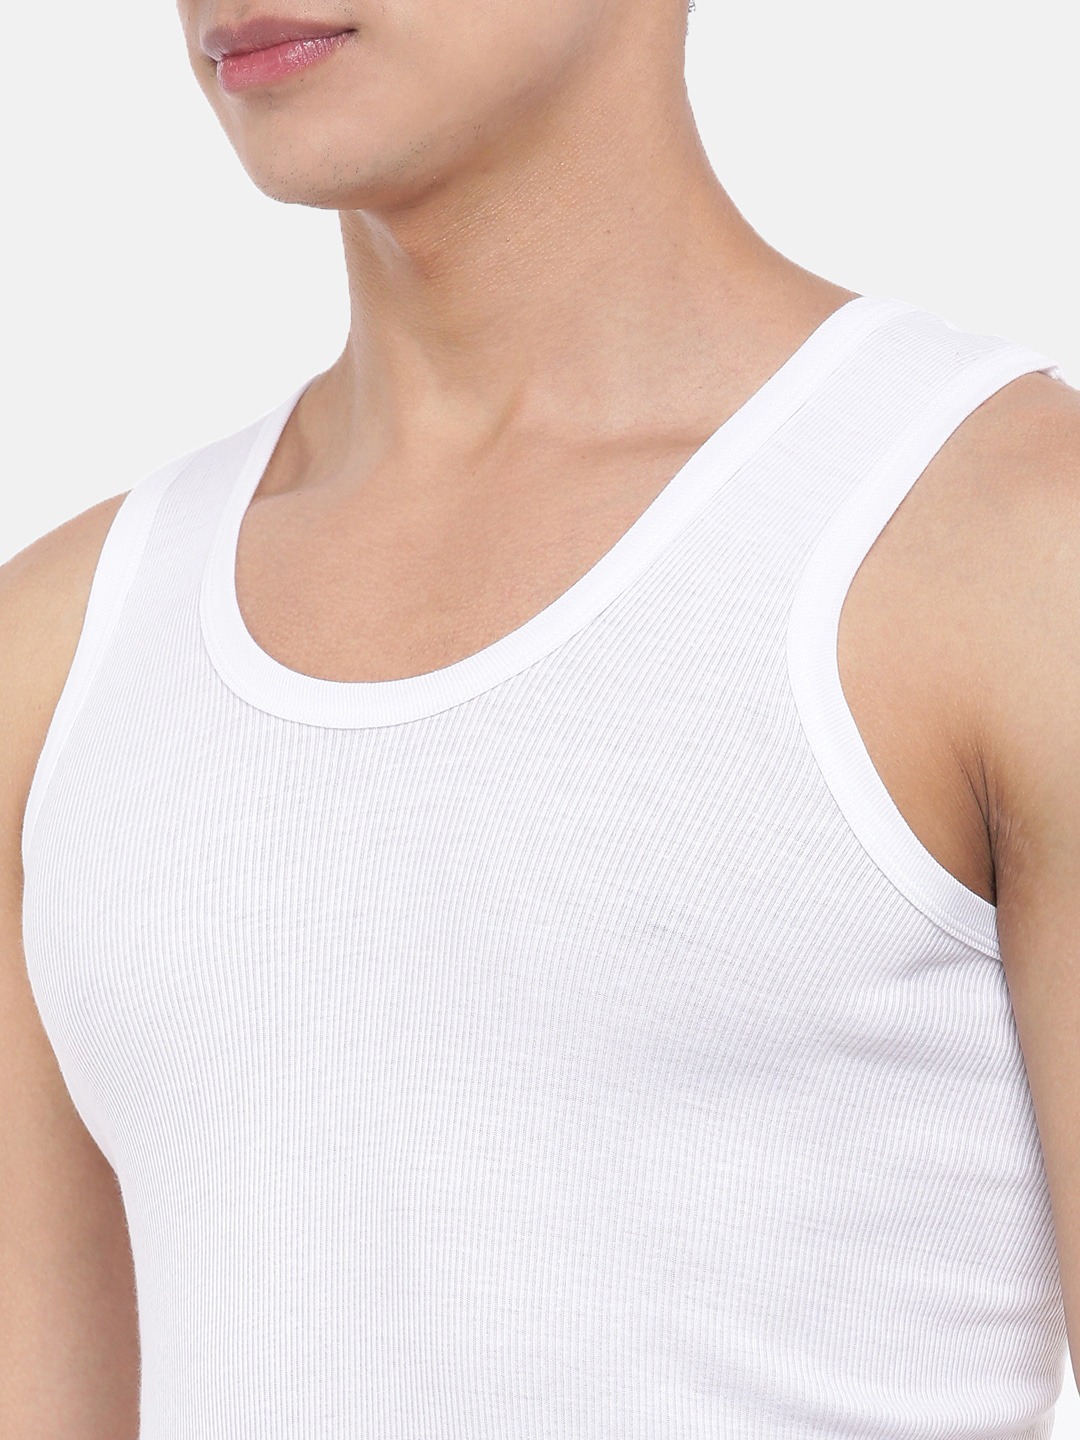 Clothing Innerwear Vests | Dollar Bigboss Men Pack Of 6 Solid Pure Super Combed Cotton Innerwear Vests - NW09568